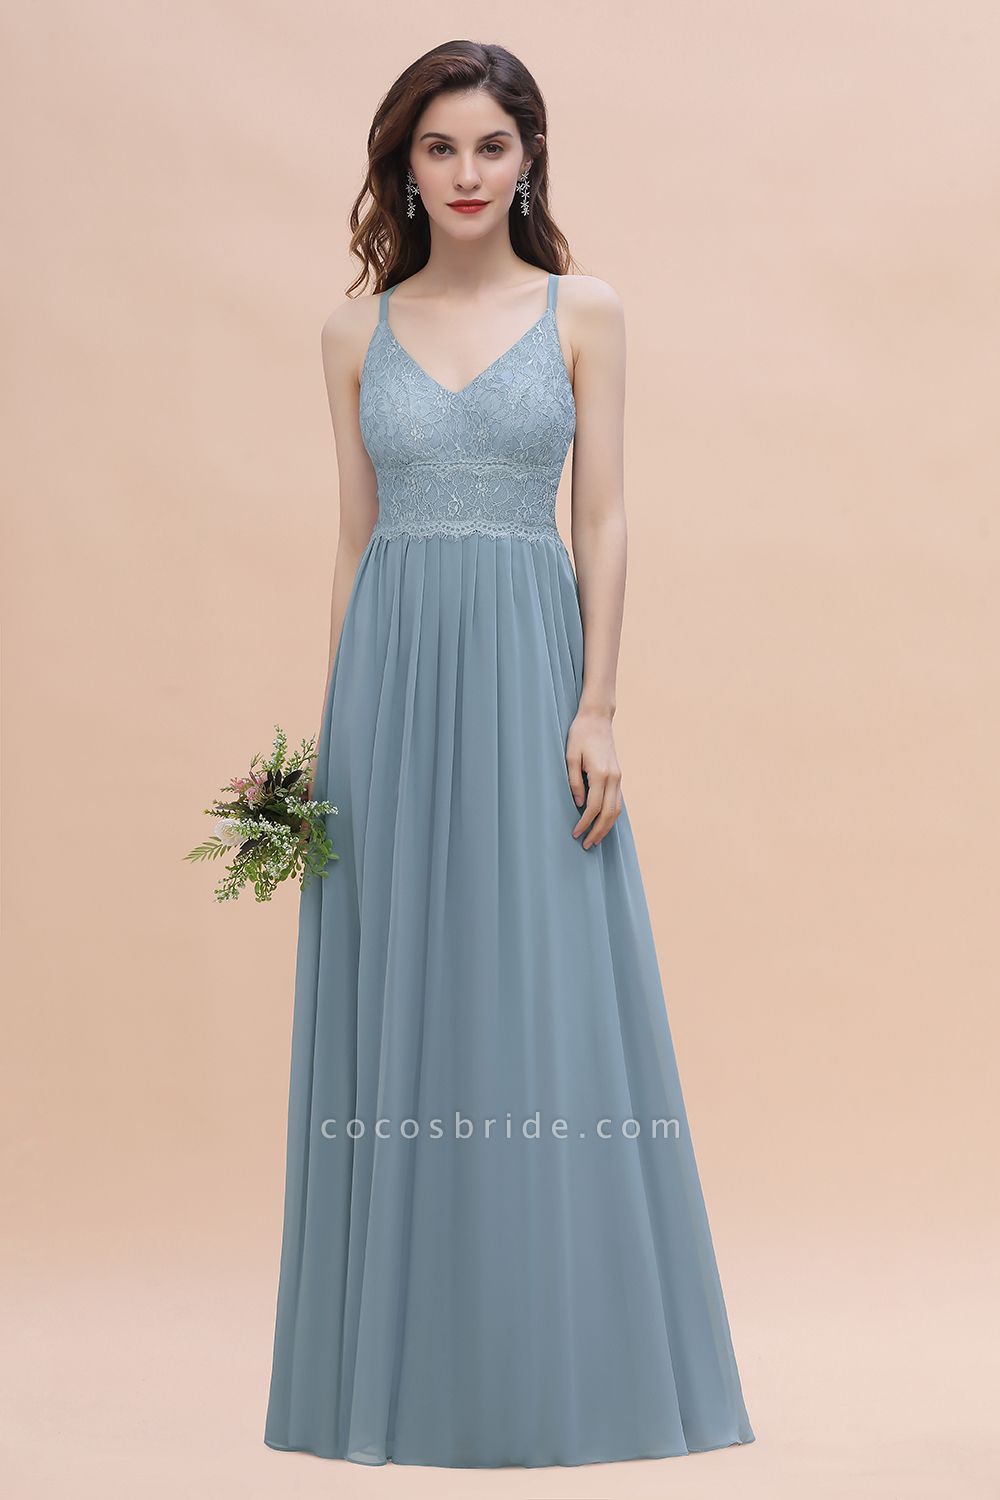 A-Line Ruched Bridesmaid Dress V-Neck Lace Chiffon Floor-length Evening Dress